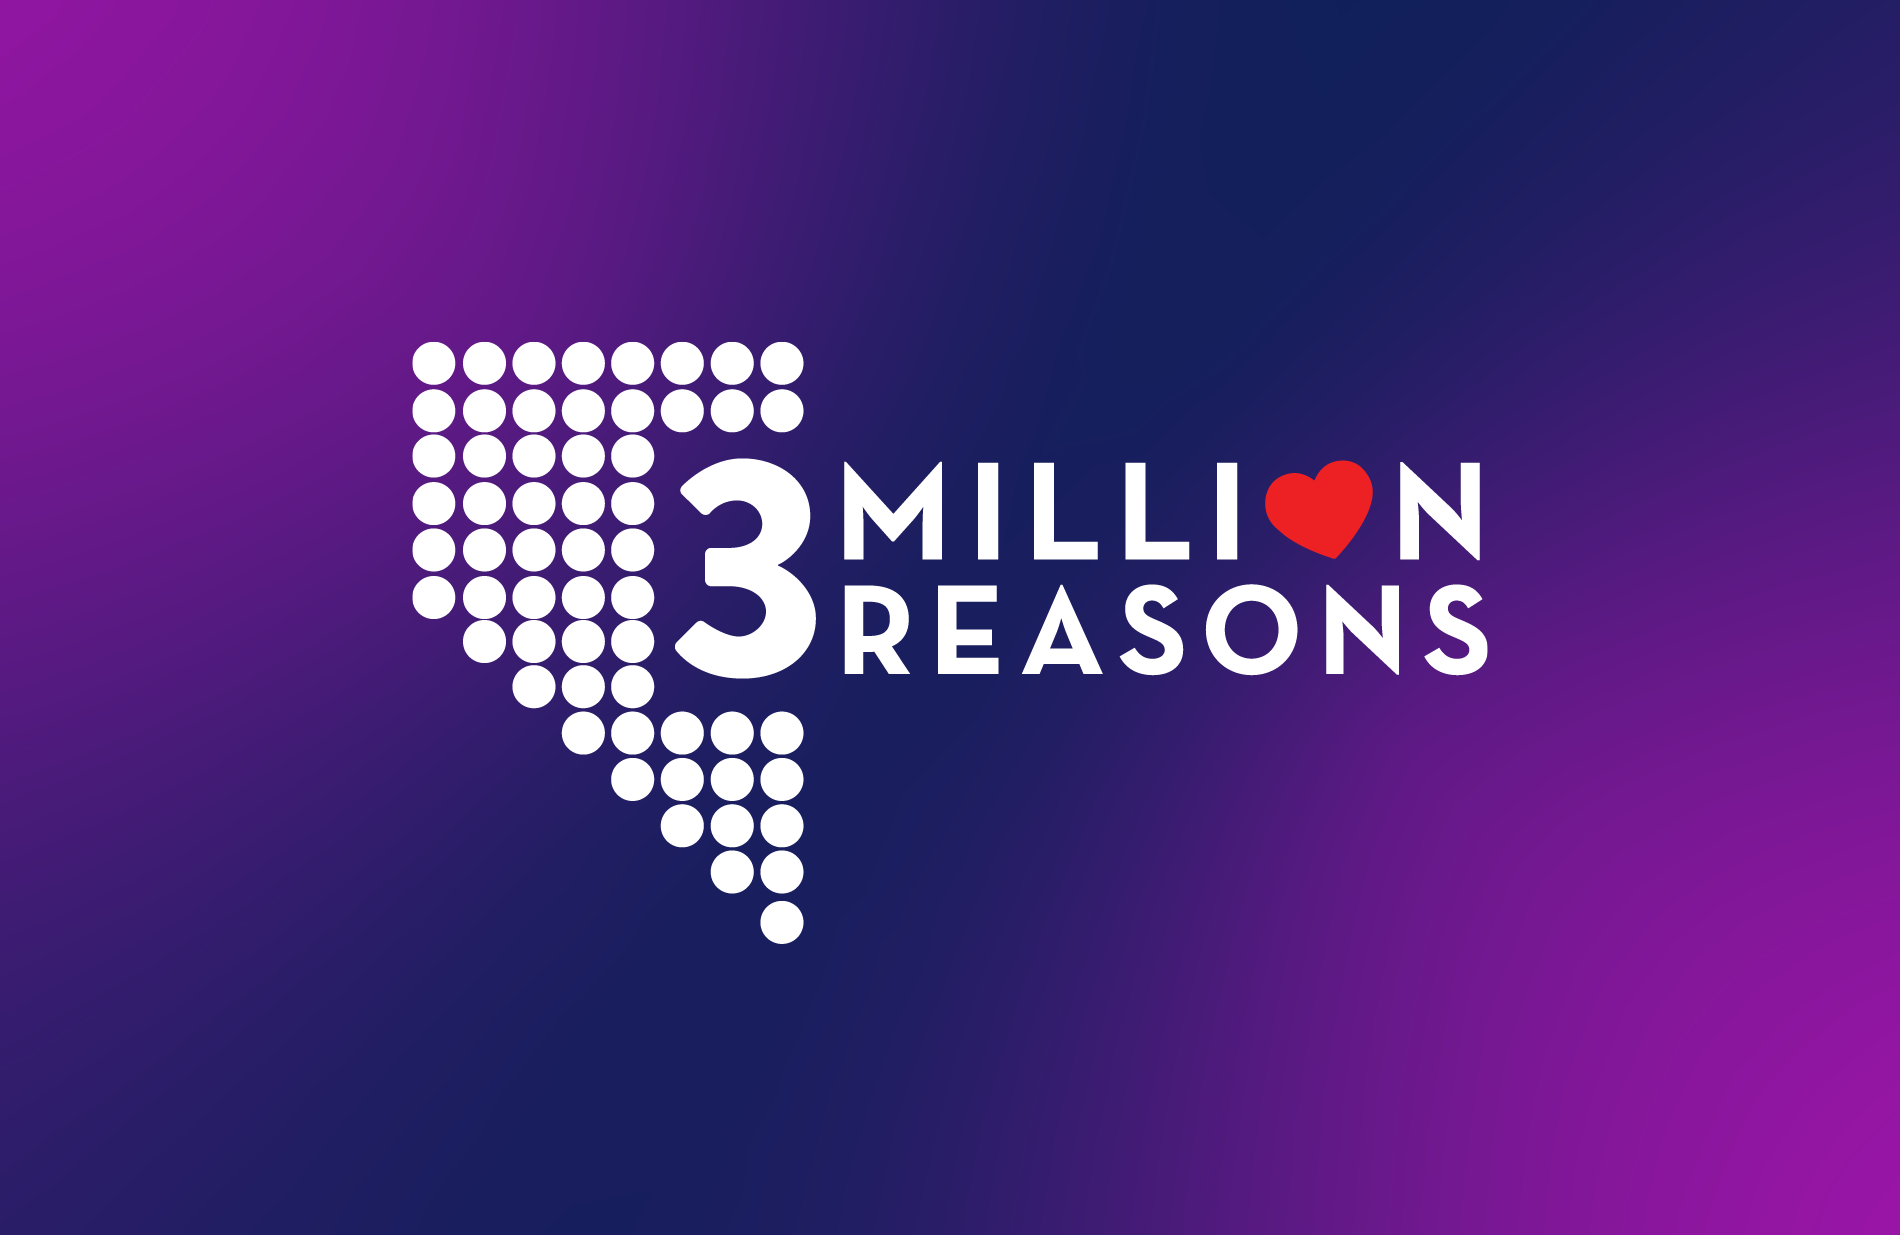 Purple background with 3 Million Reasons text and logo